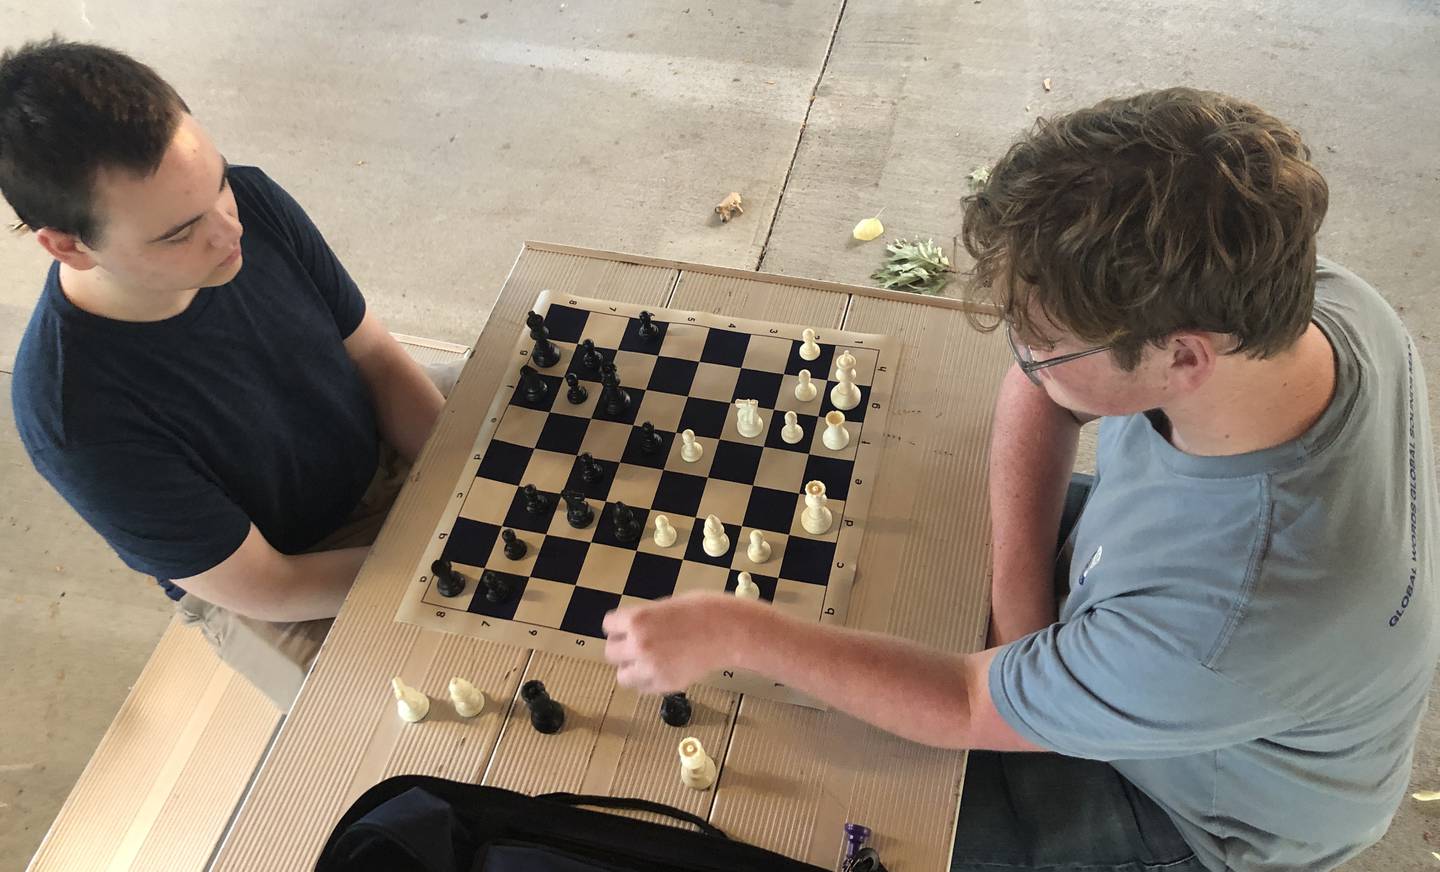 Zach Martin, left, 19, and Jake Miller, 17, have played chess since they were young boys, learning from their fathers, and set up a board on Tuesday, Sept. 20, 2022, at Veterans Memorial Park.